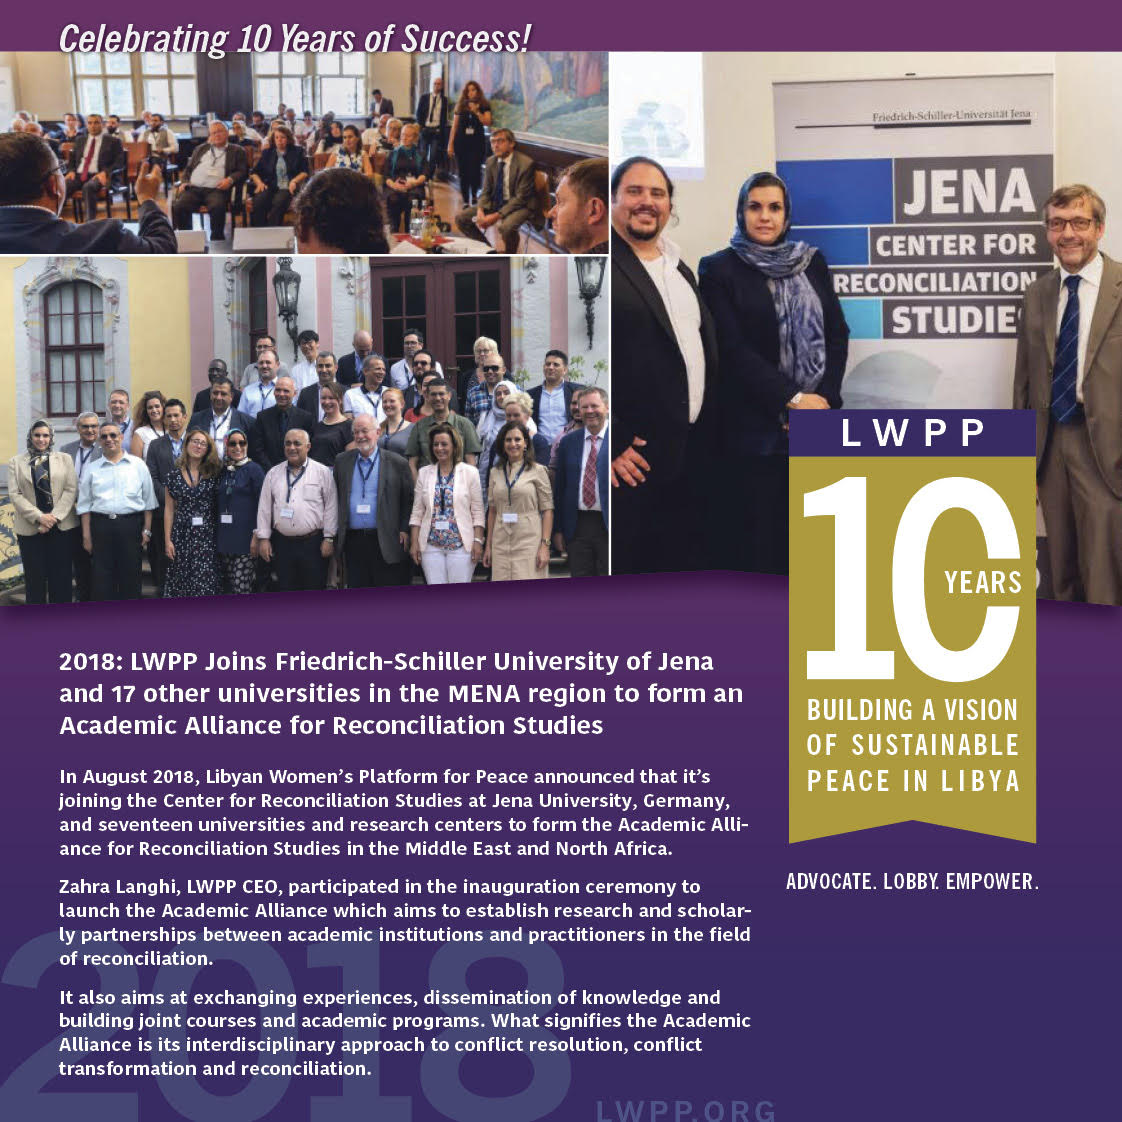  LWPP Joins Friedrich-Schiller University of Jena and 17 other universities in the MENA region to form an Academic Alliance for Reconciliation Studies